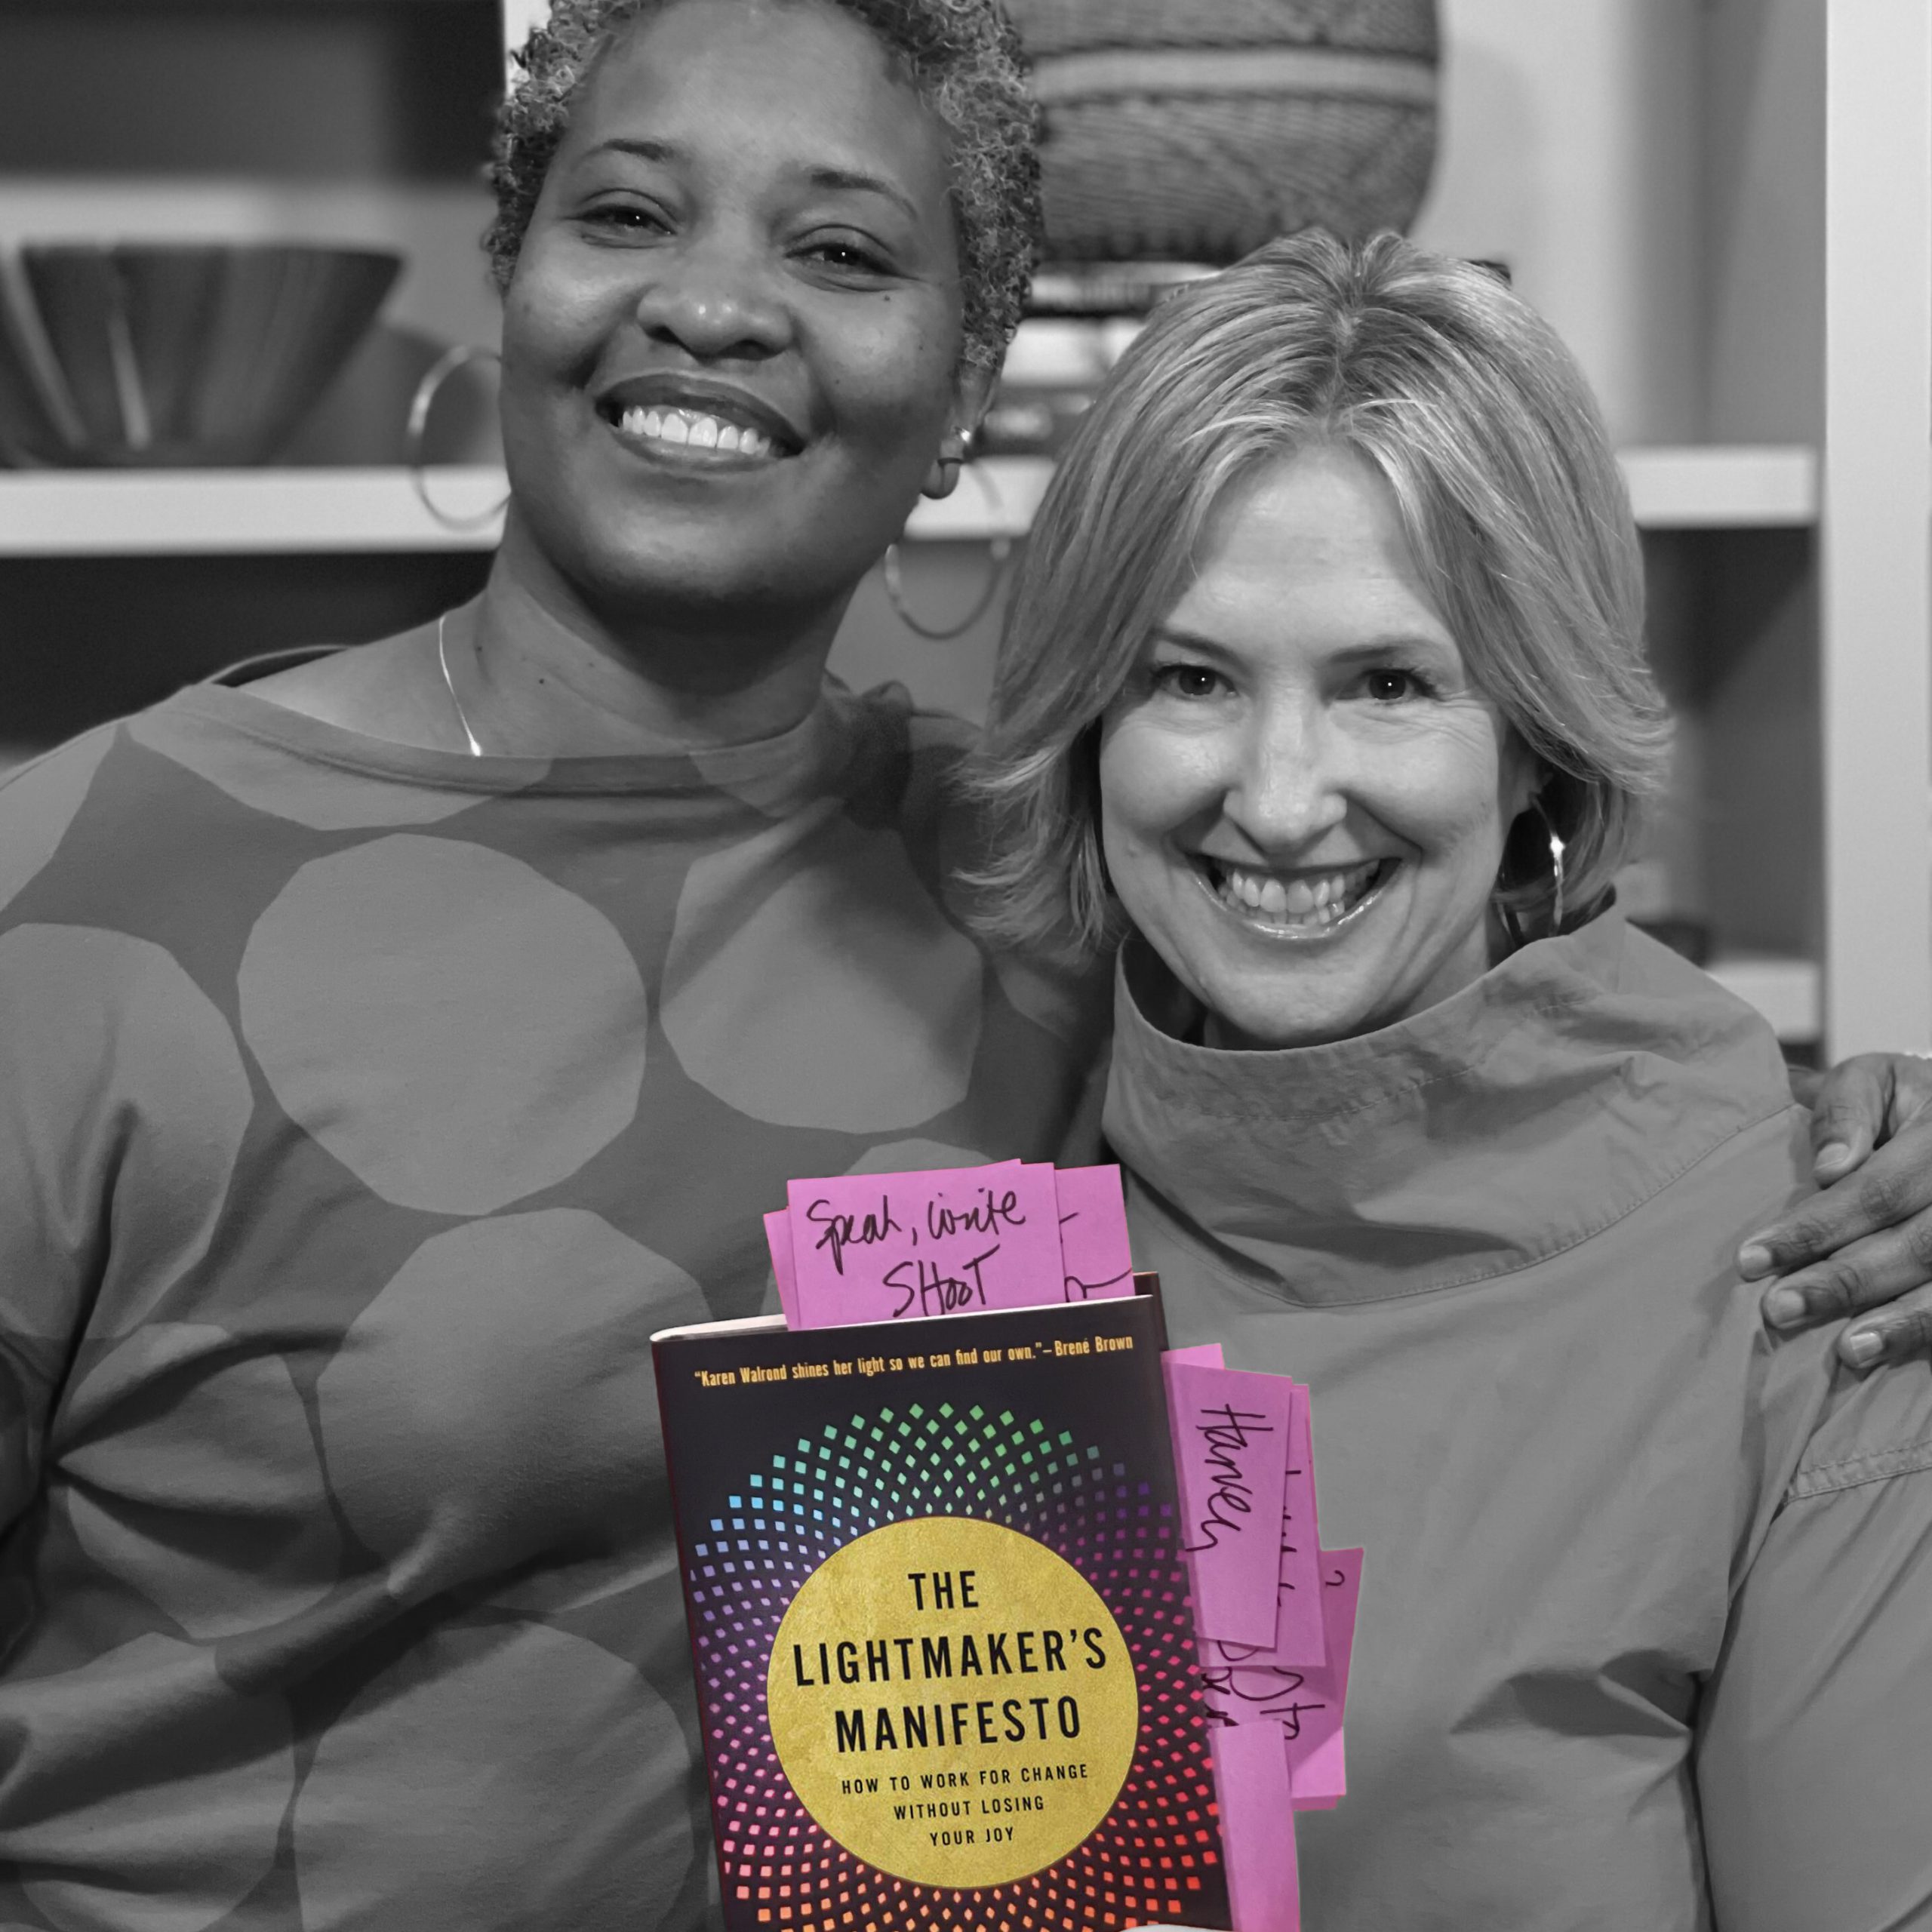 Brené Brown with author and friend Karen Walrond and her new book, The Lightmaker’s Manifesto.